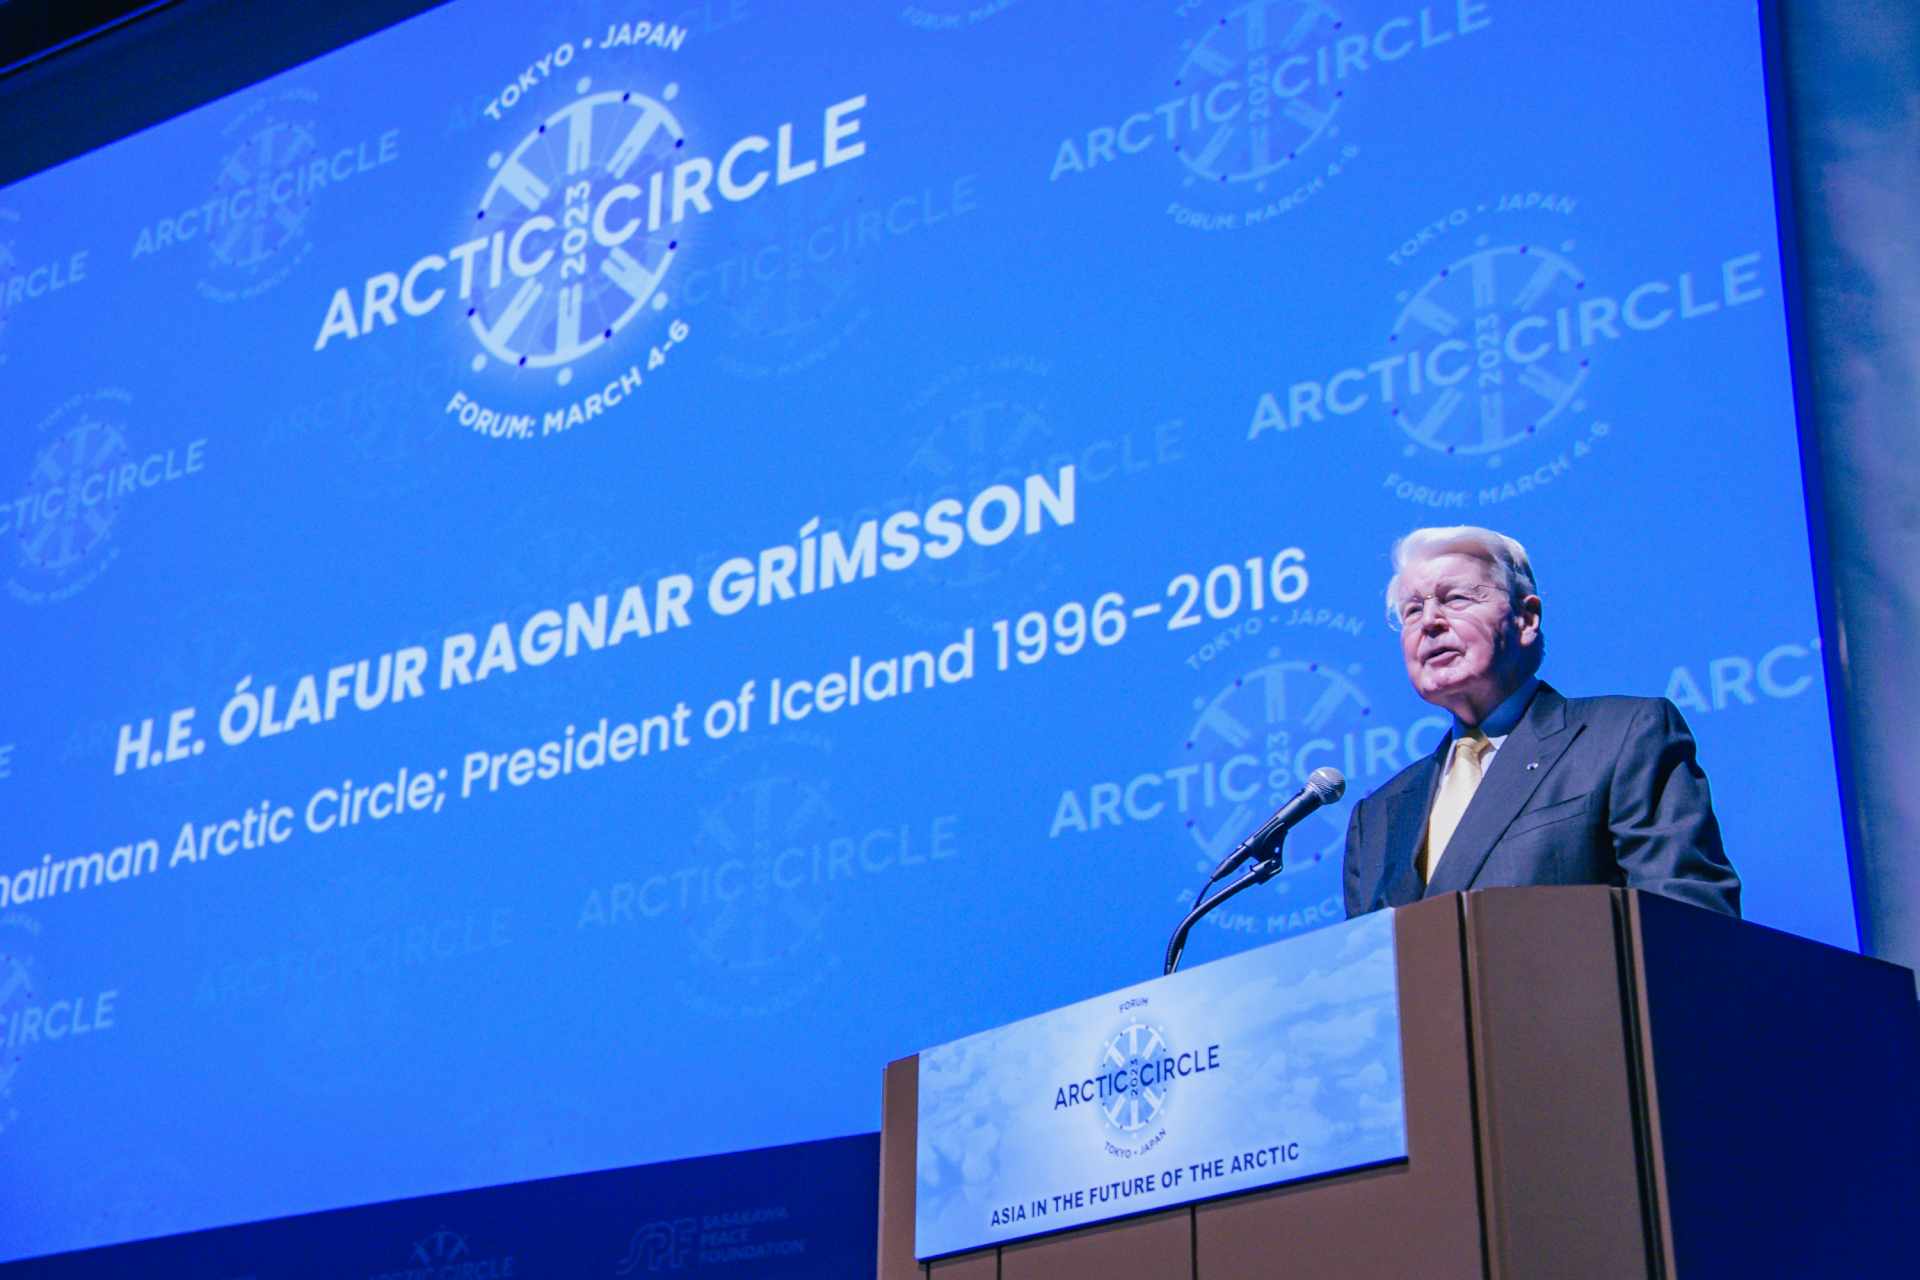 H.E. Ólafur Ragnar Grímsson, Chairman of Arctic Circle, giving a speech at the opening session.